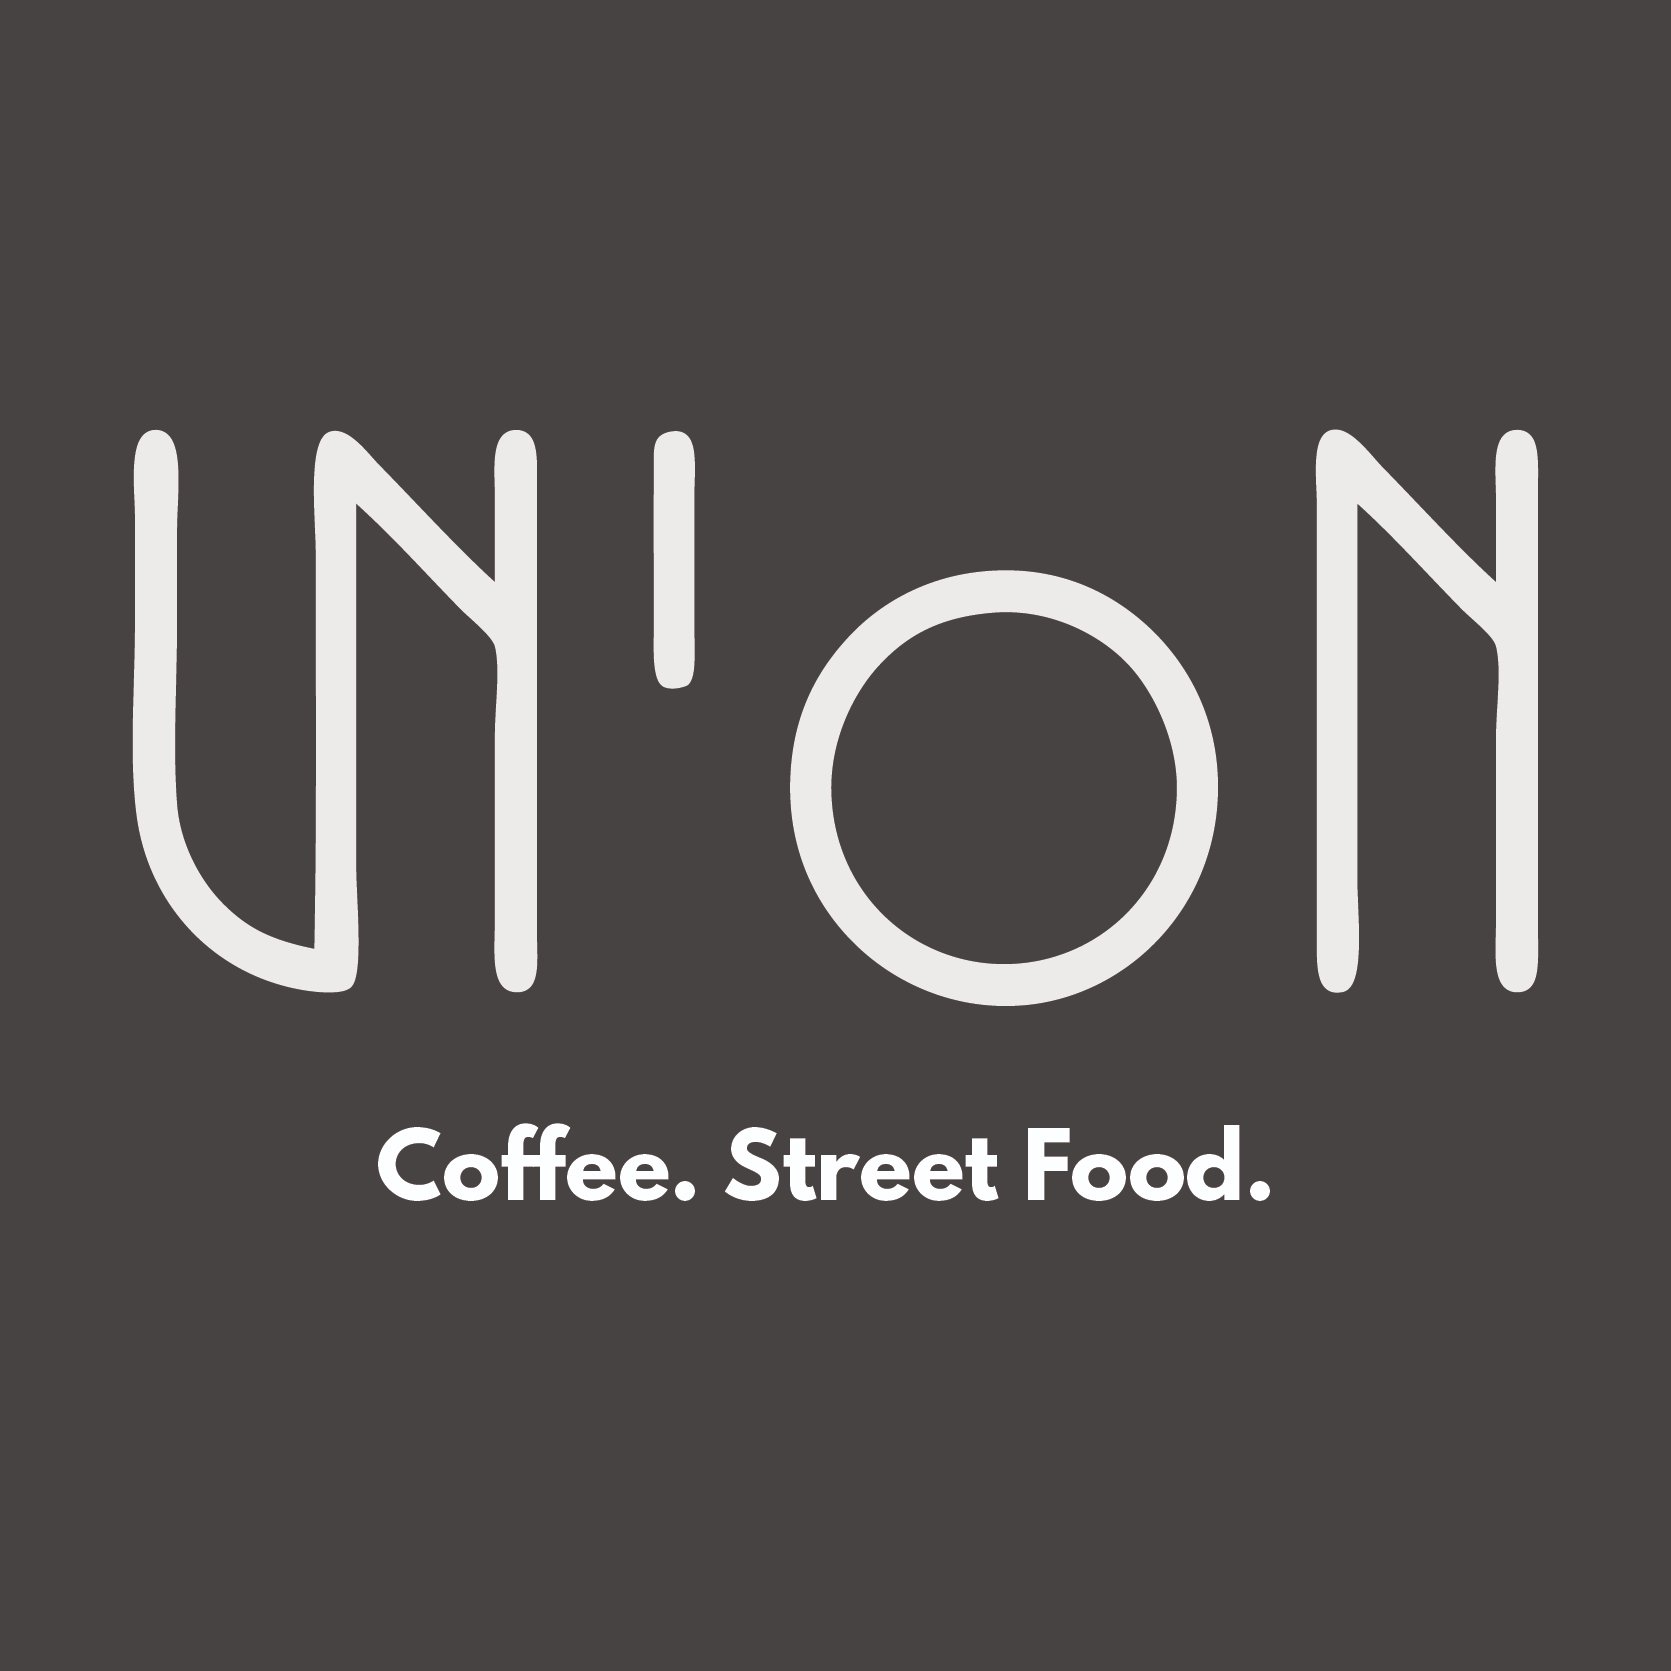 ☕🥐 at Union St ° Award winning coffee, fresh pastries and local street food served daily ° On the ground floor of Union St 8-4 Mon - Fri & 10-4 Sat